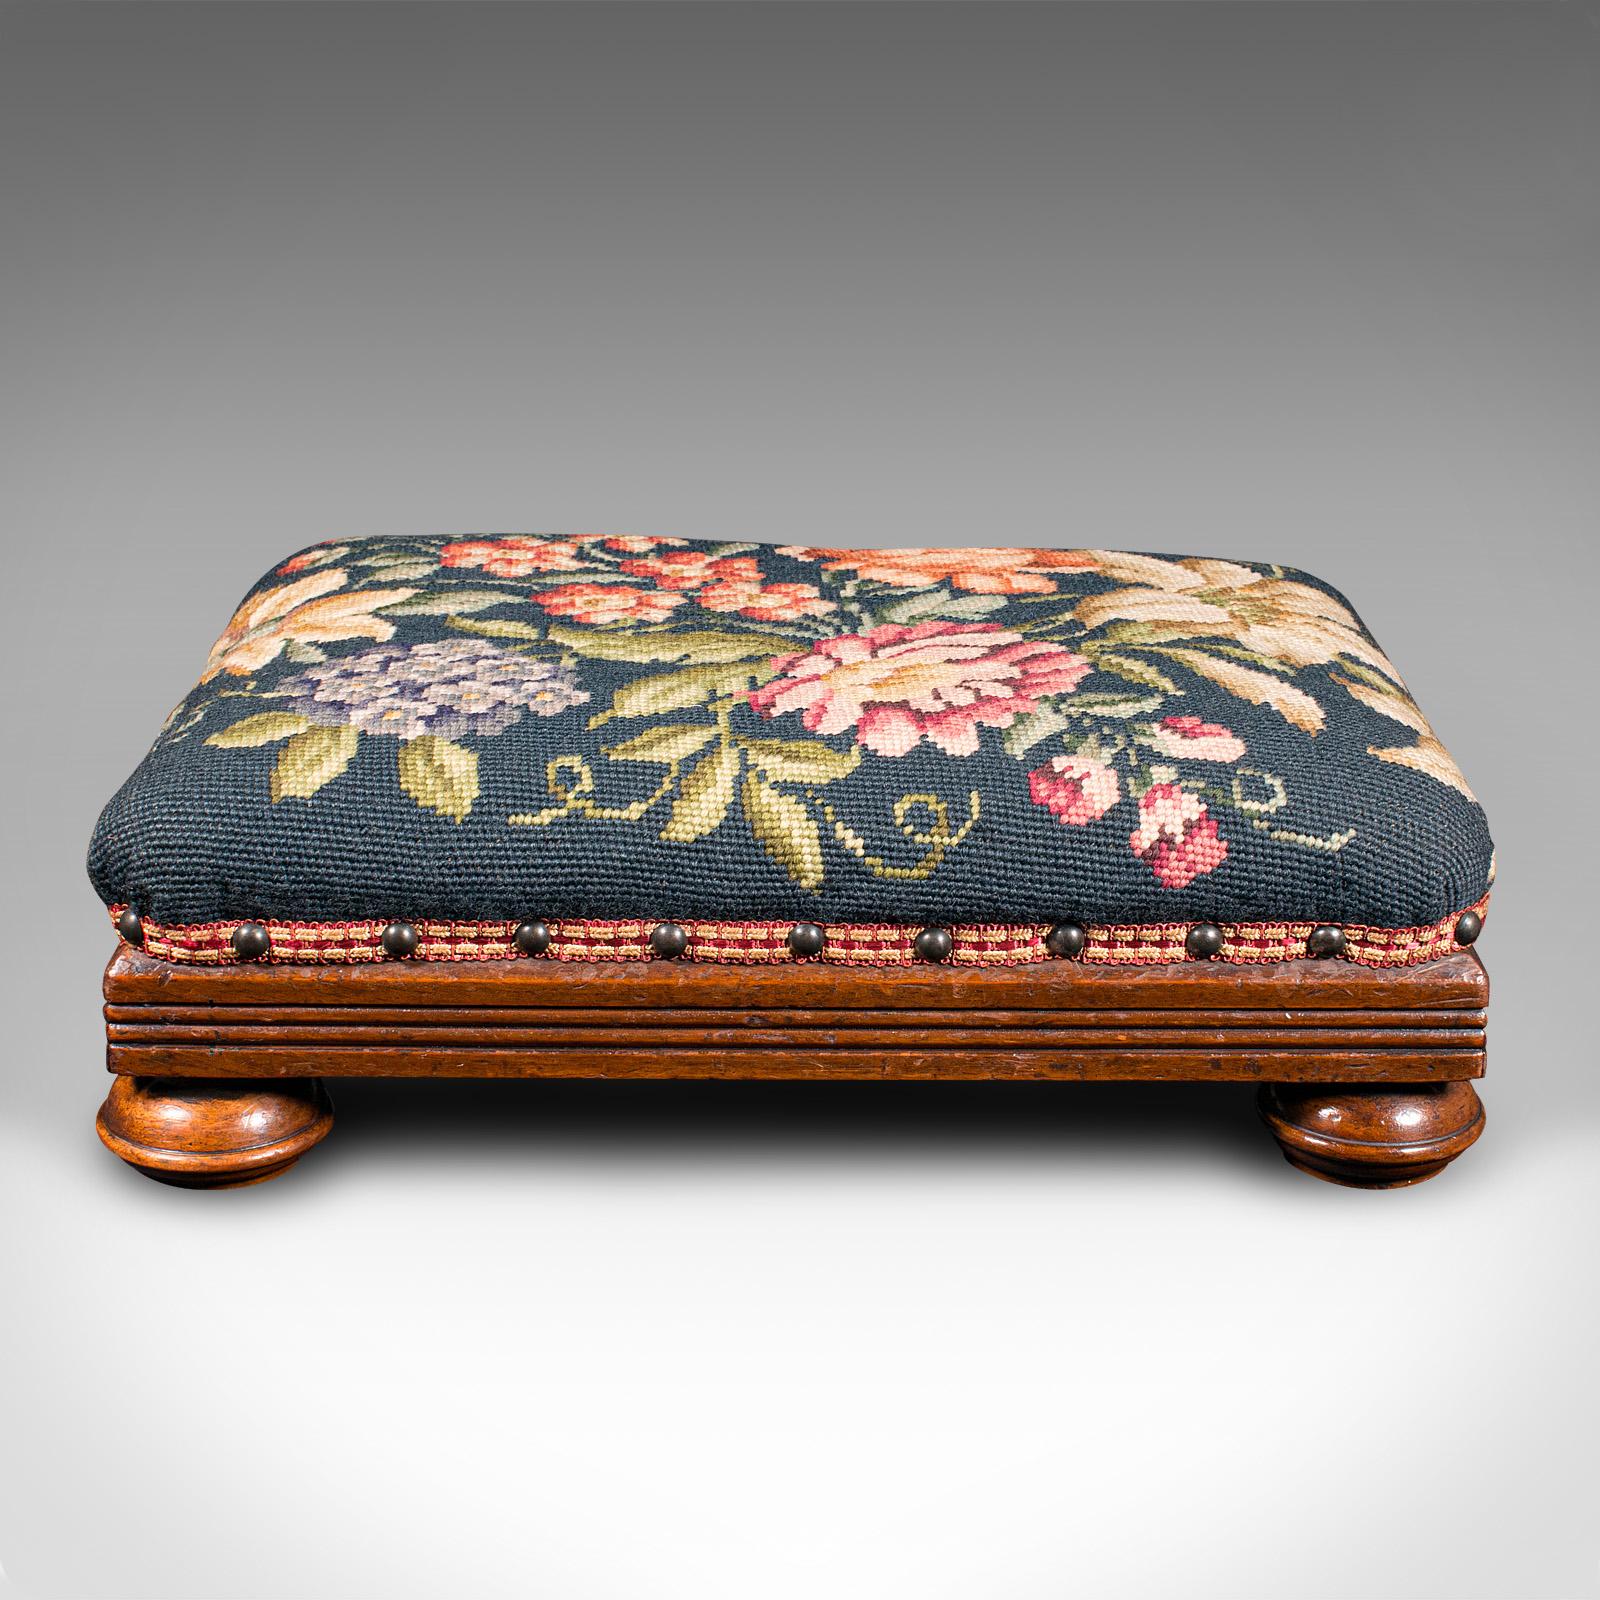 Late Victorian Antique Footstool, English, Needlepoint, Fireside Footrest, Stool, Victorian For Sale